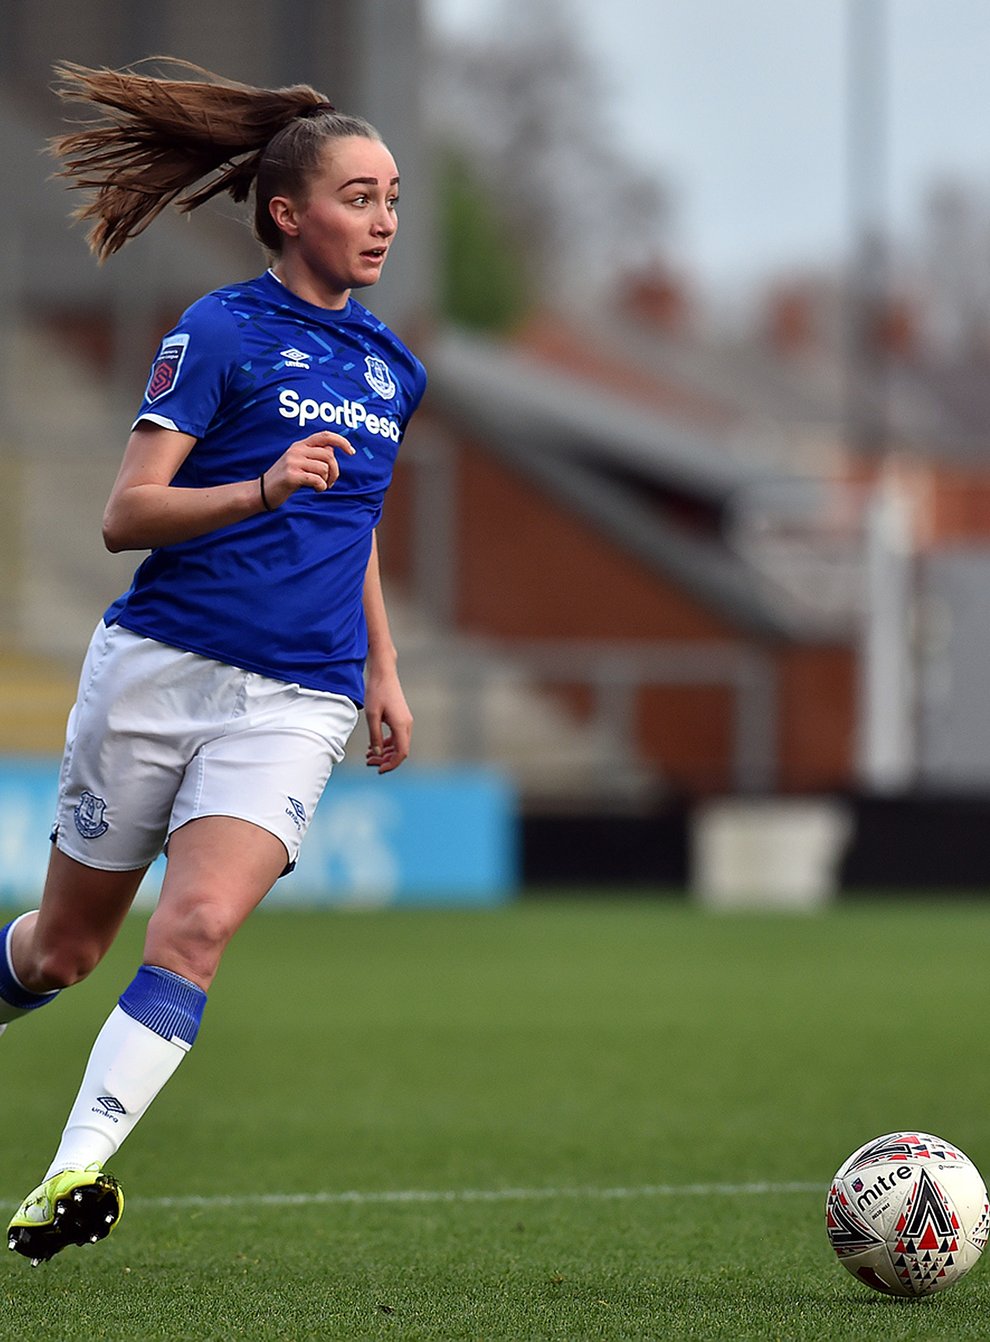 Everton's Megan Finnigan has been named in the squad (PA Images)